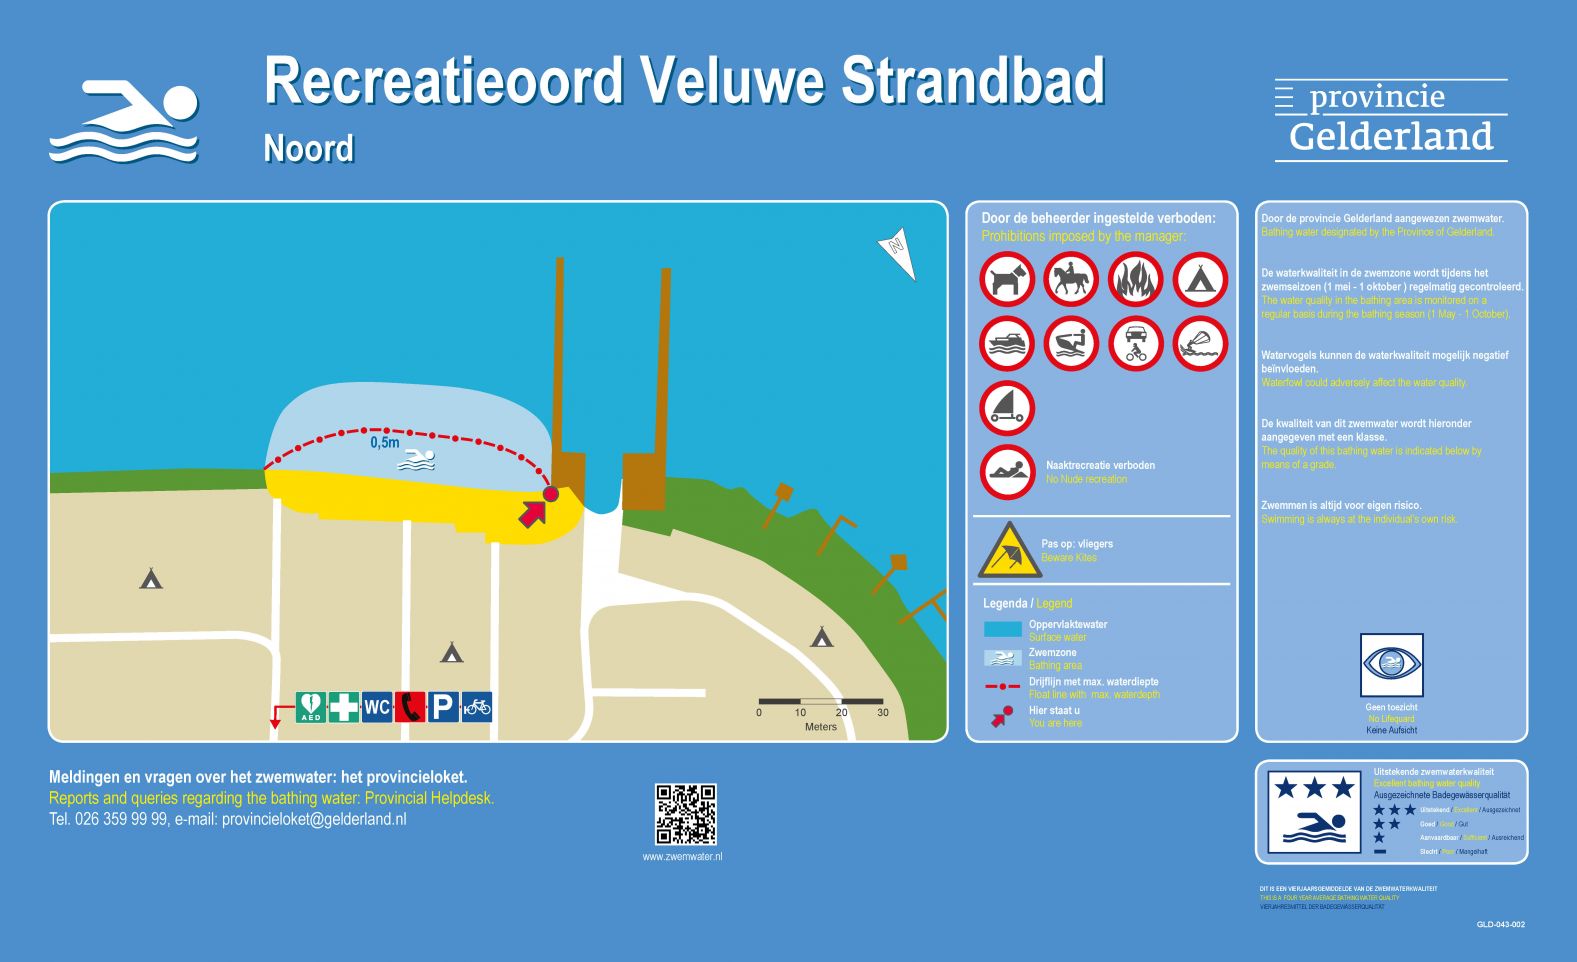 The information board at the swimming location Veluwe Strandbad Noord